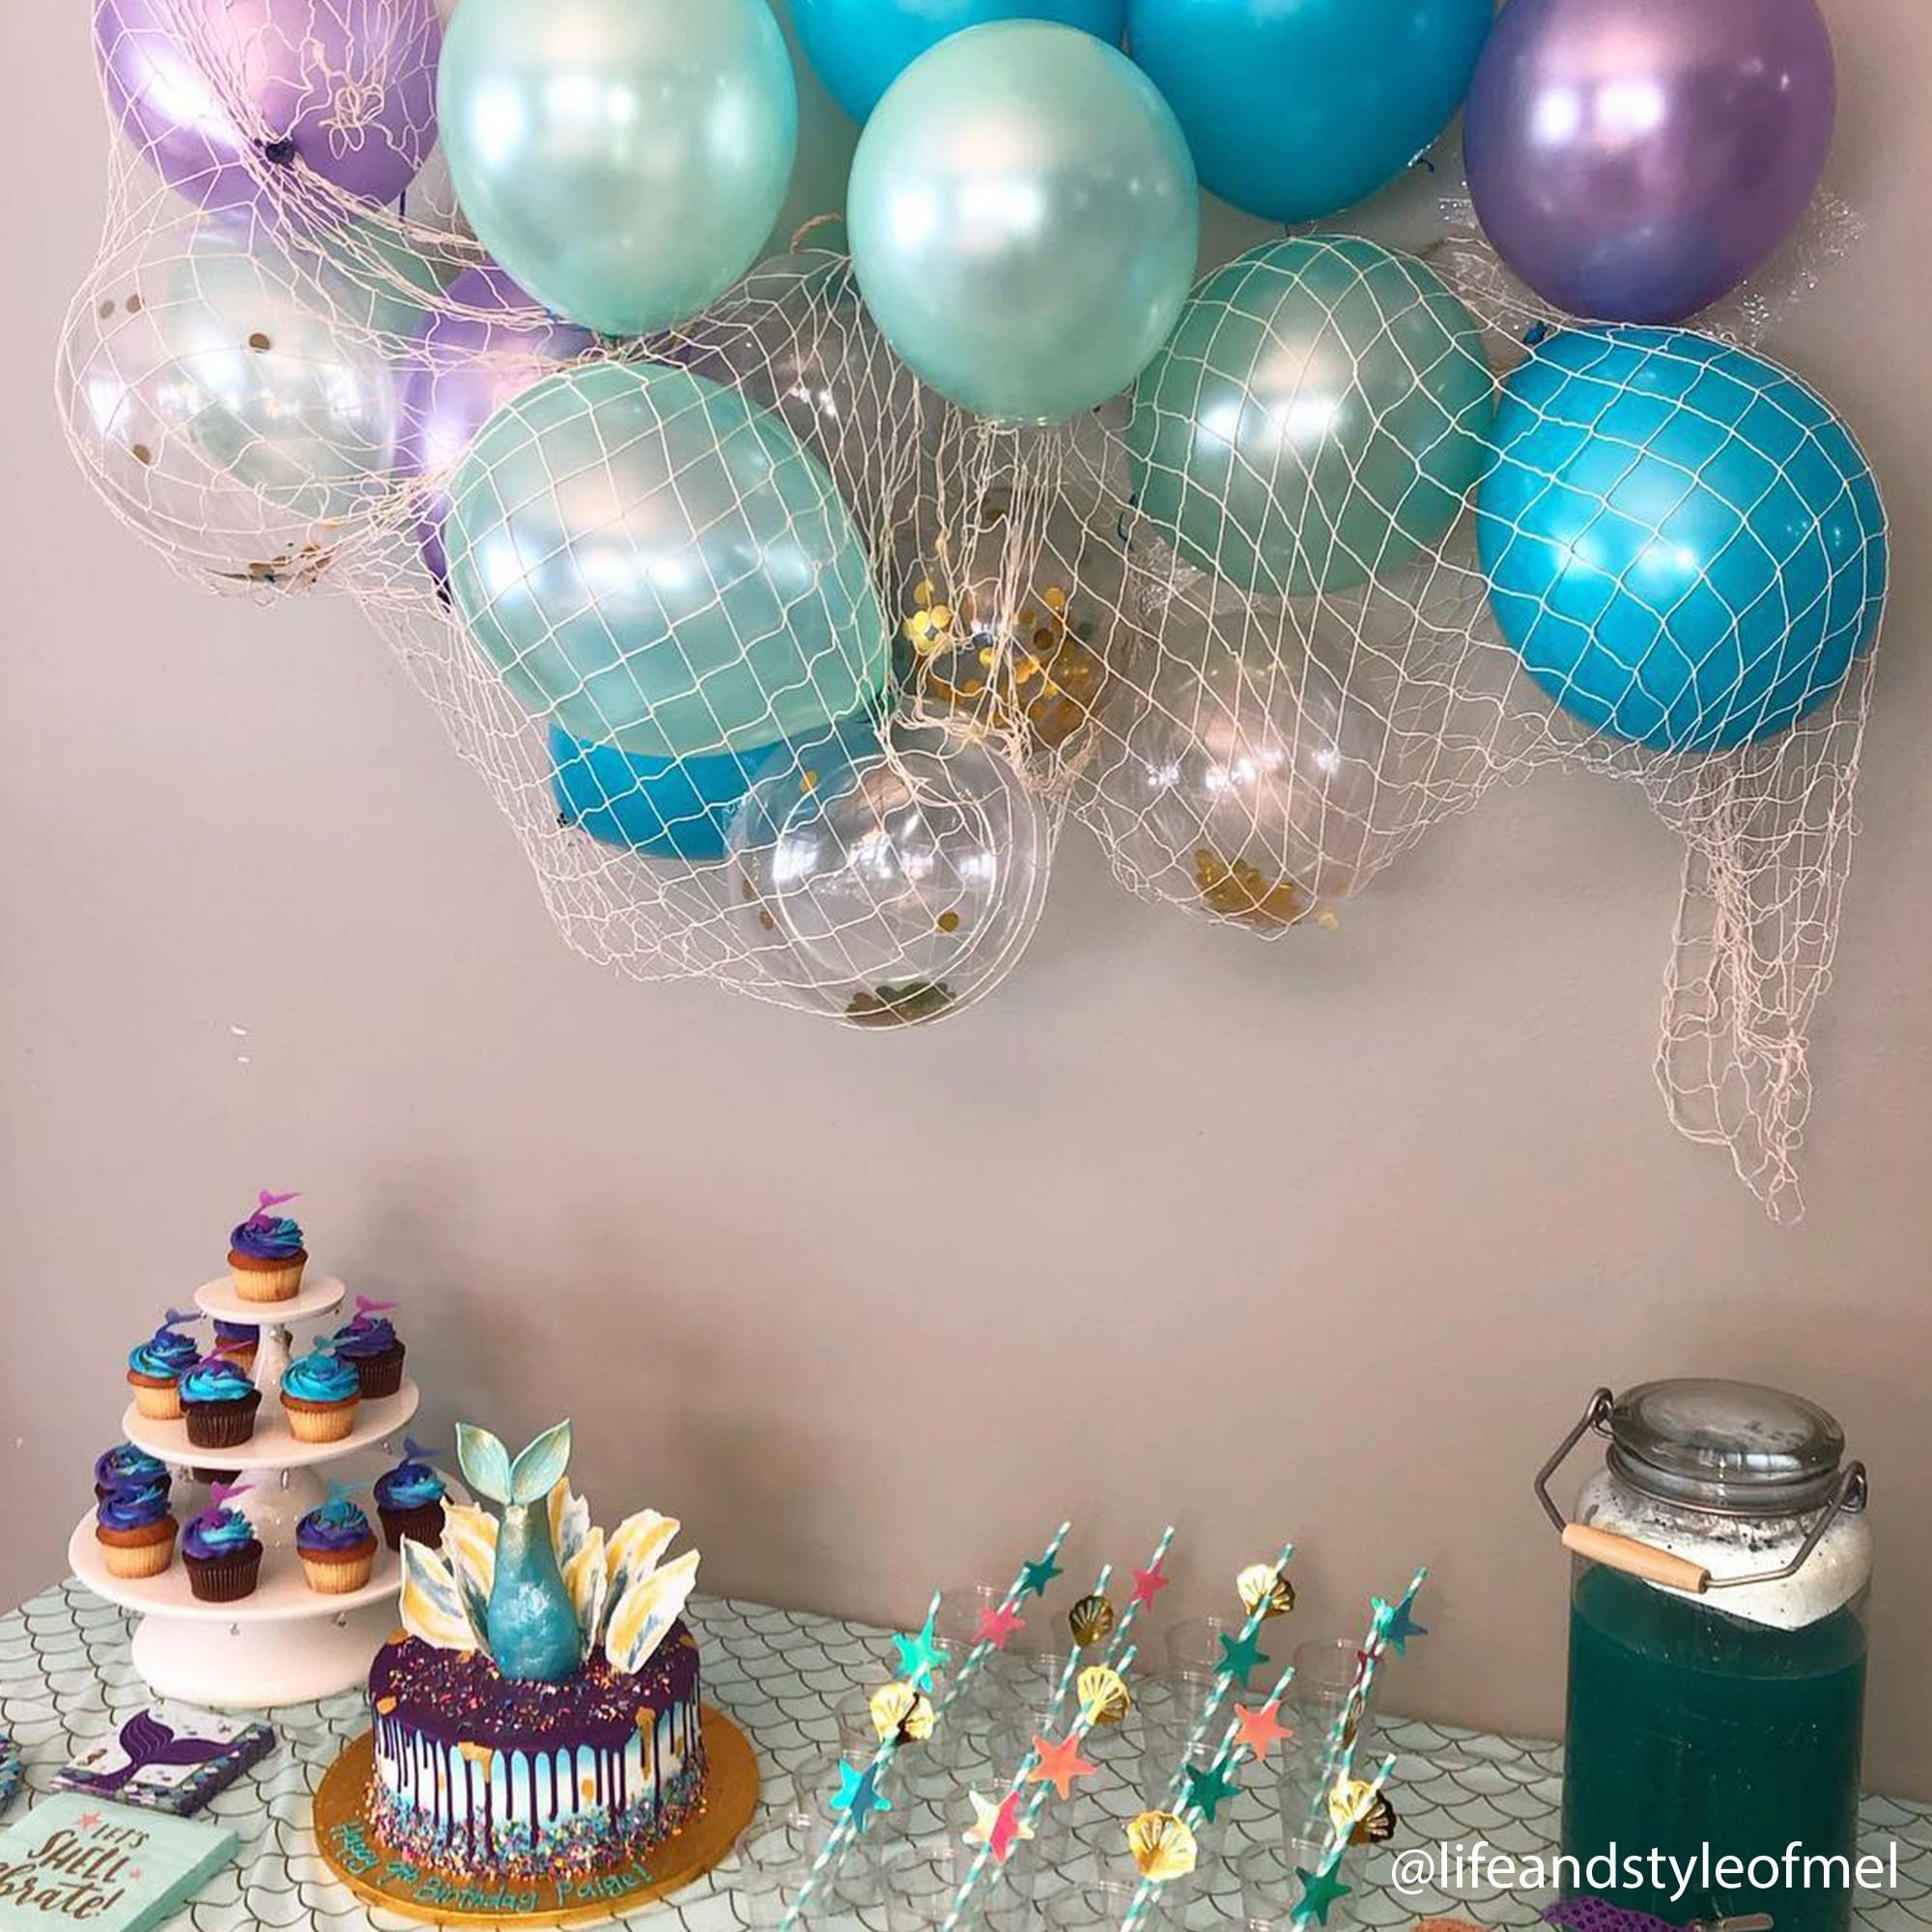 Mermaid Party Balloon Decorations - Fishing Net Decorations